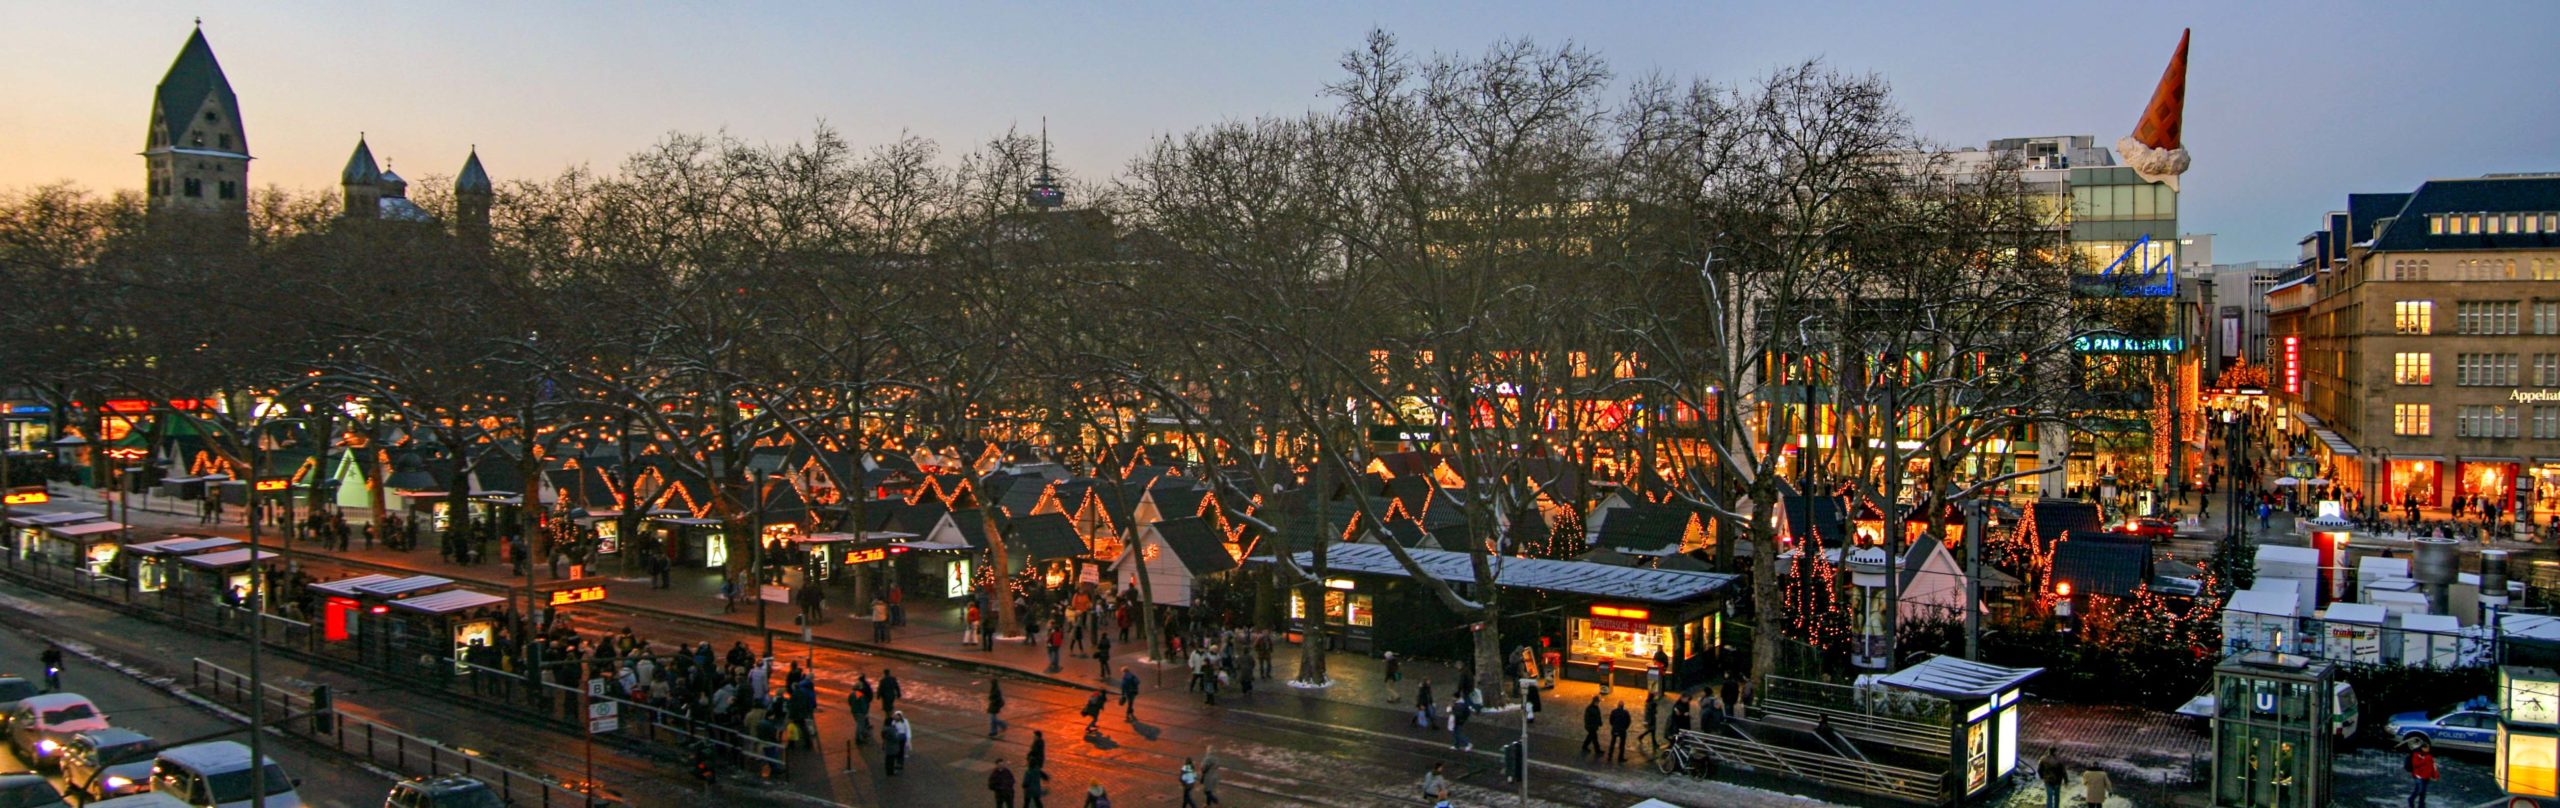 Neumarkt Christmas Market in Cologne © Superbass - licence [CC BY-SA 3.0] from Wikimedia Commons